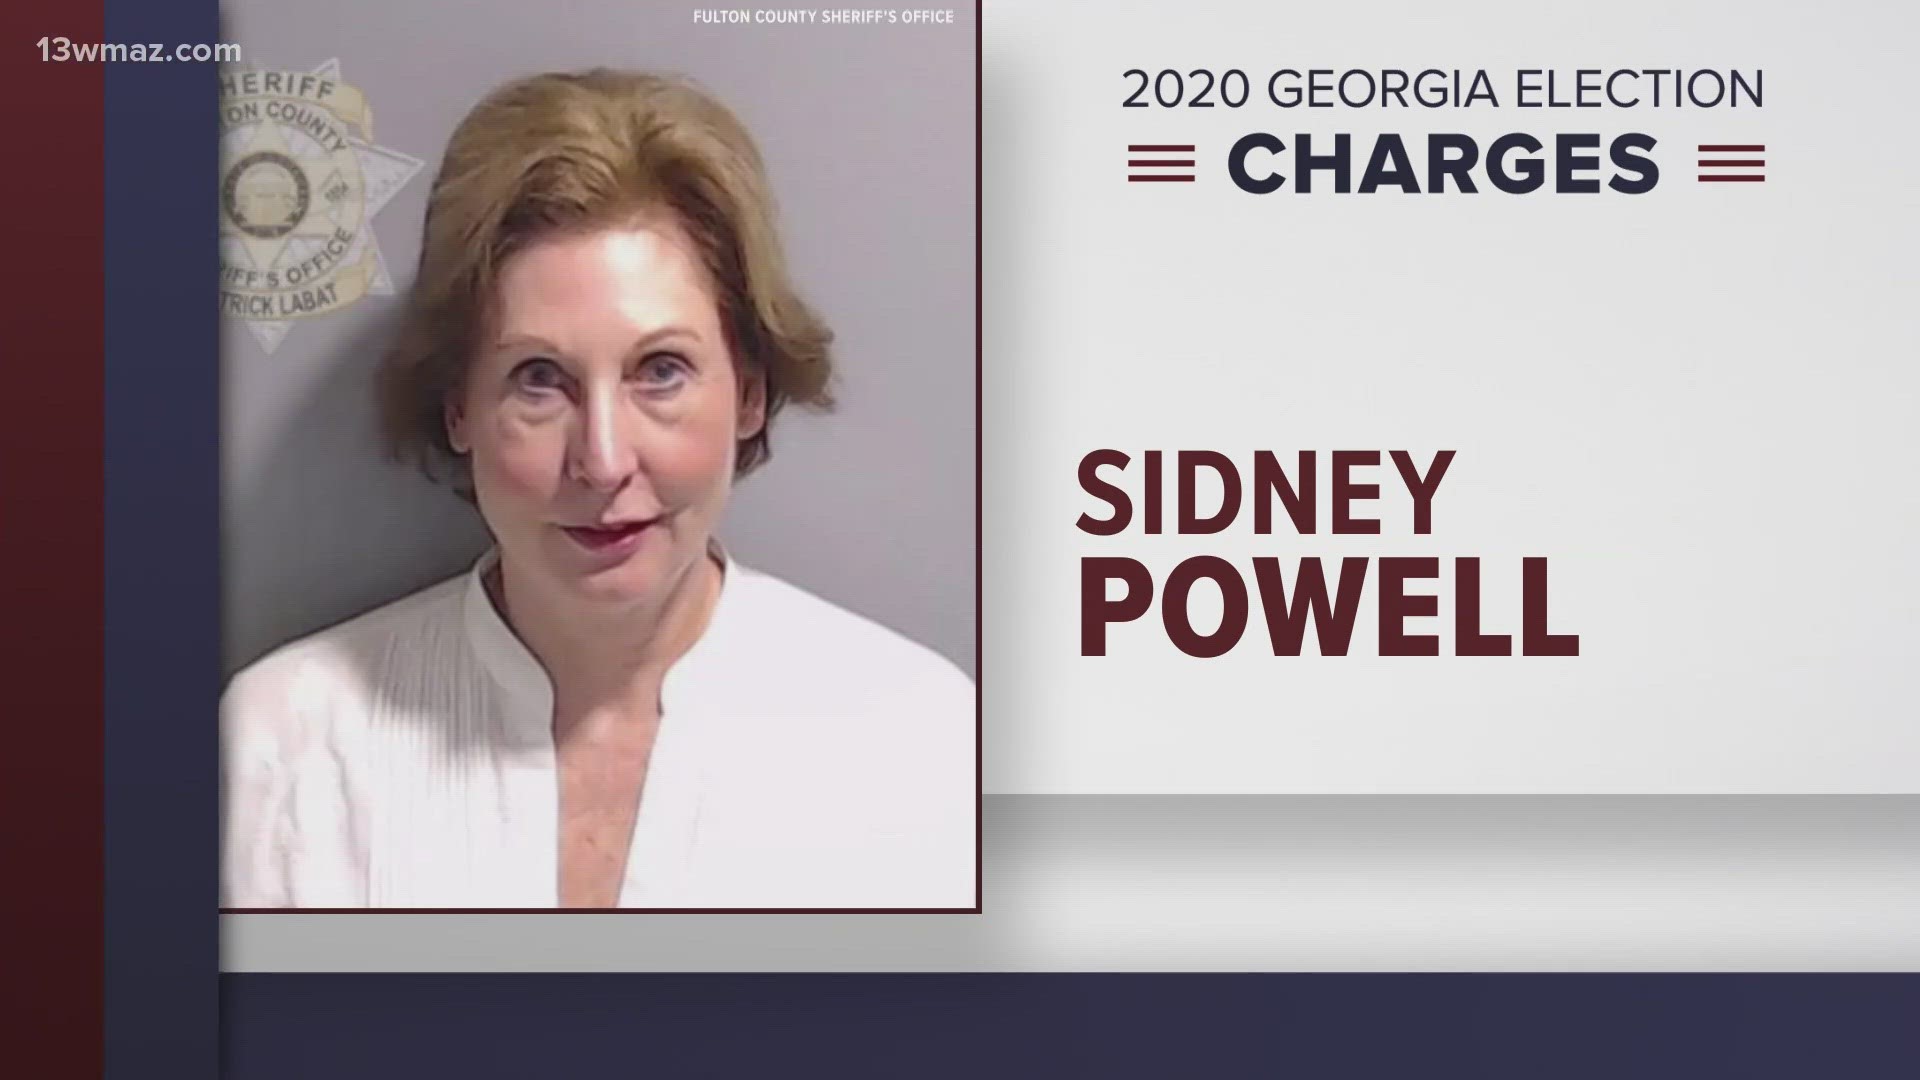 Sidney Powell and Kenneth Chesebro are asking a Fulton County judge for a separate trial in the Fulton County, Georgia Trump indictment.